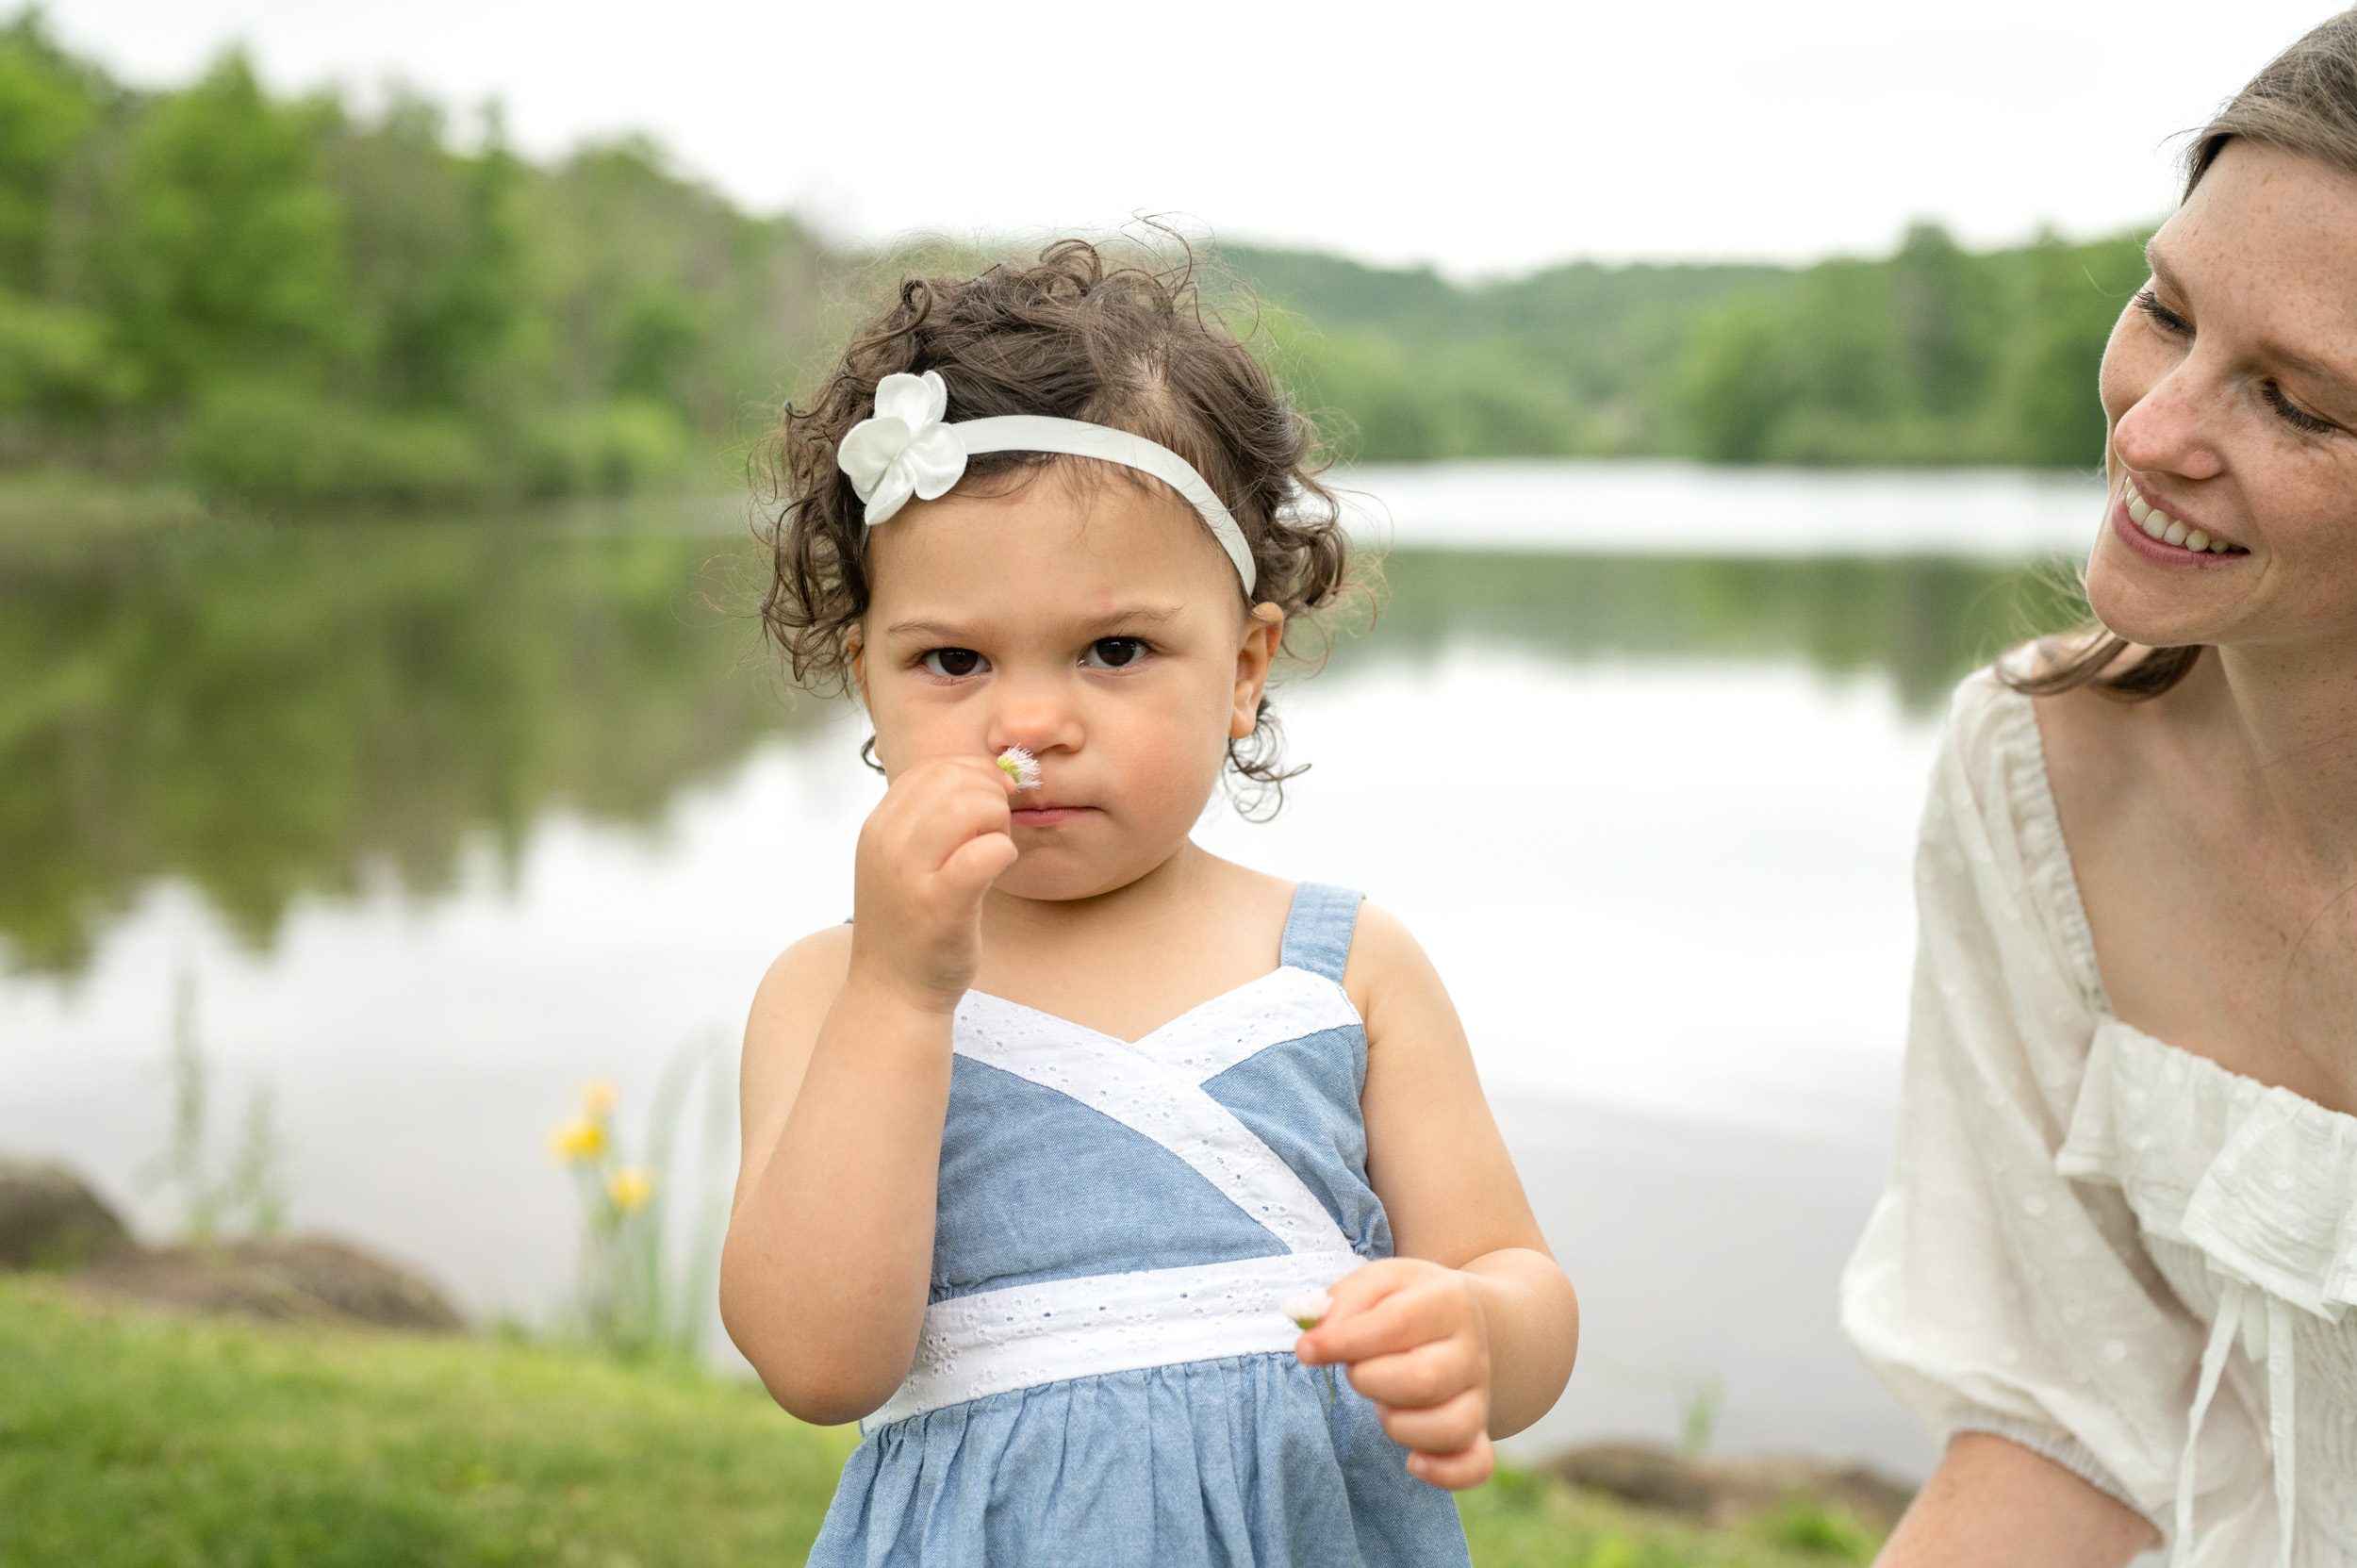 A little girl smelling a flower with a serious expression while her mom smiles at her during a family photoshoot